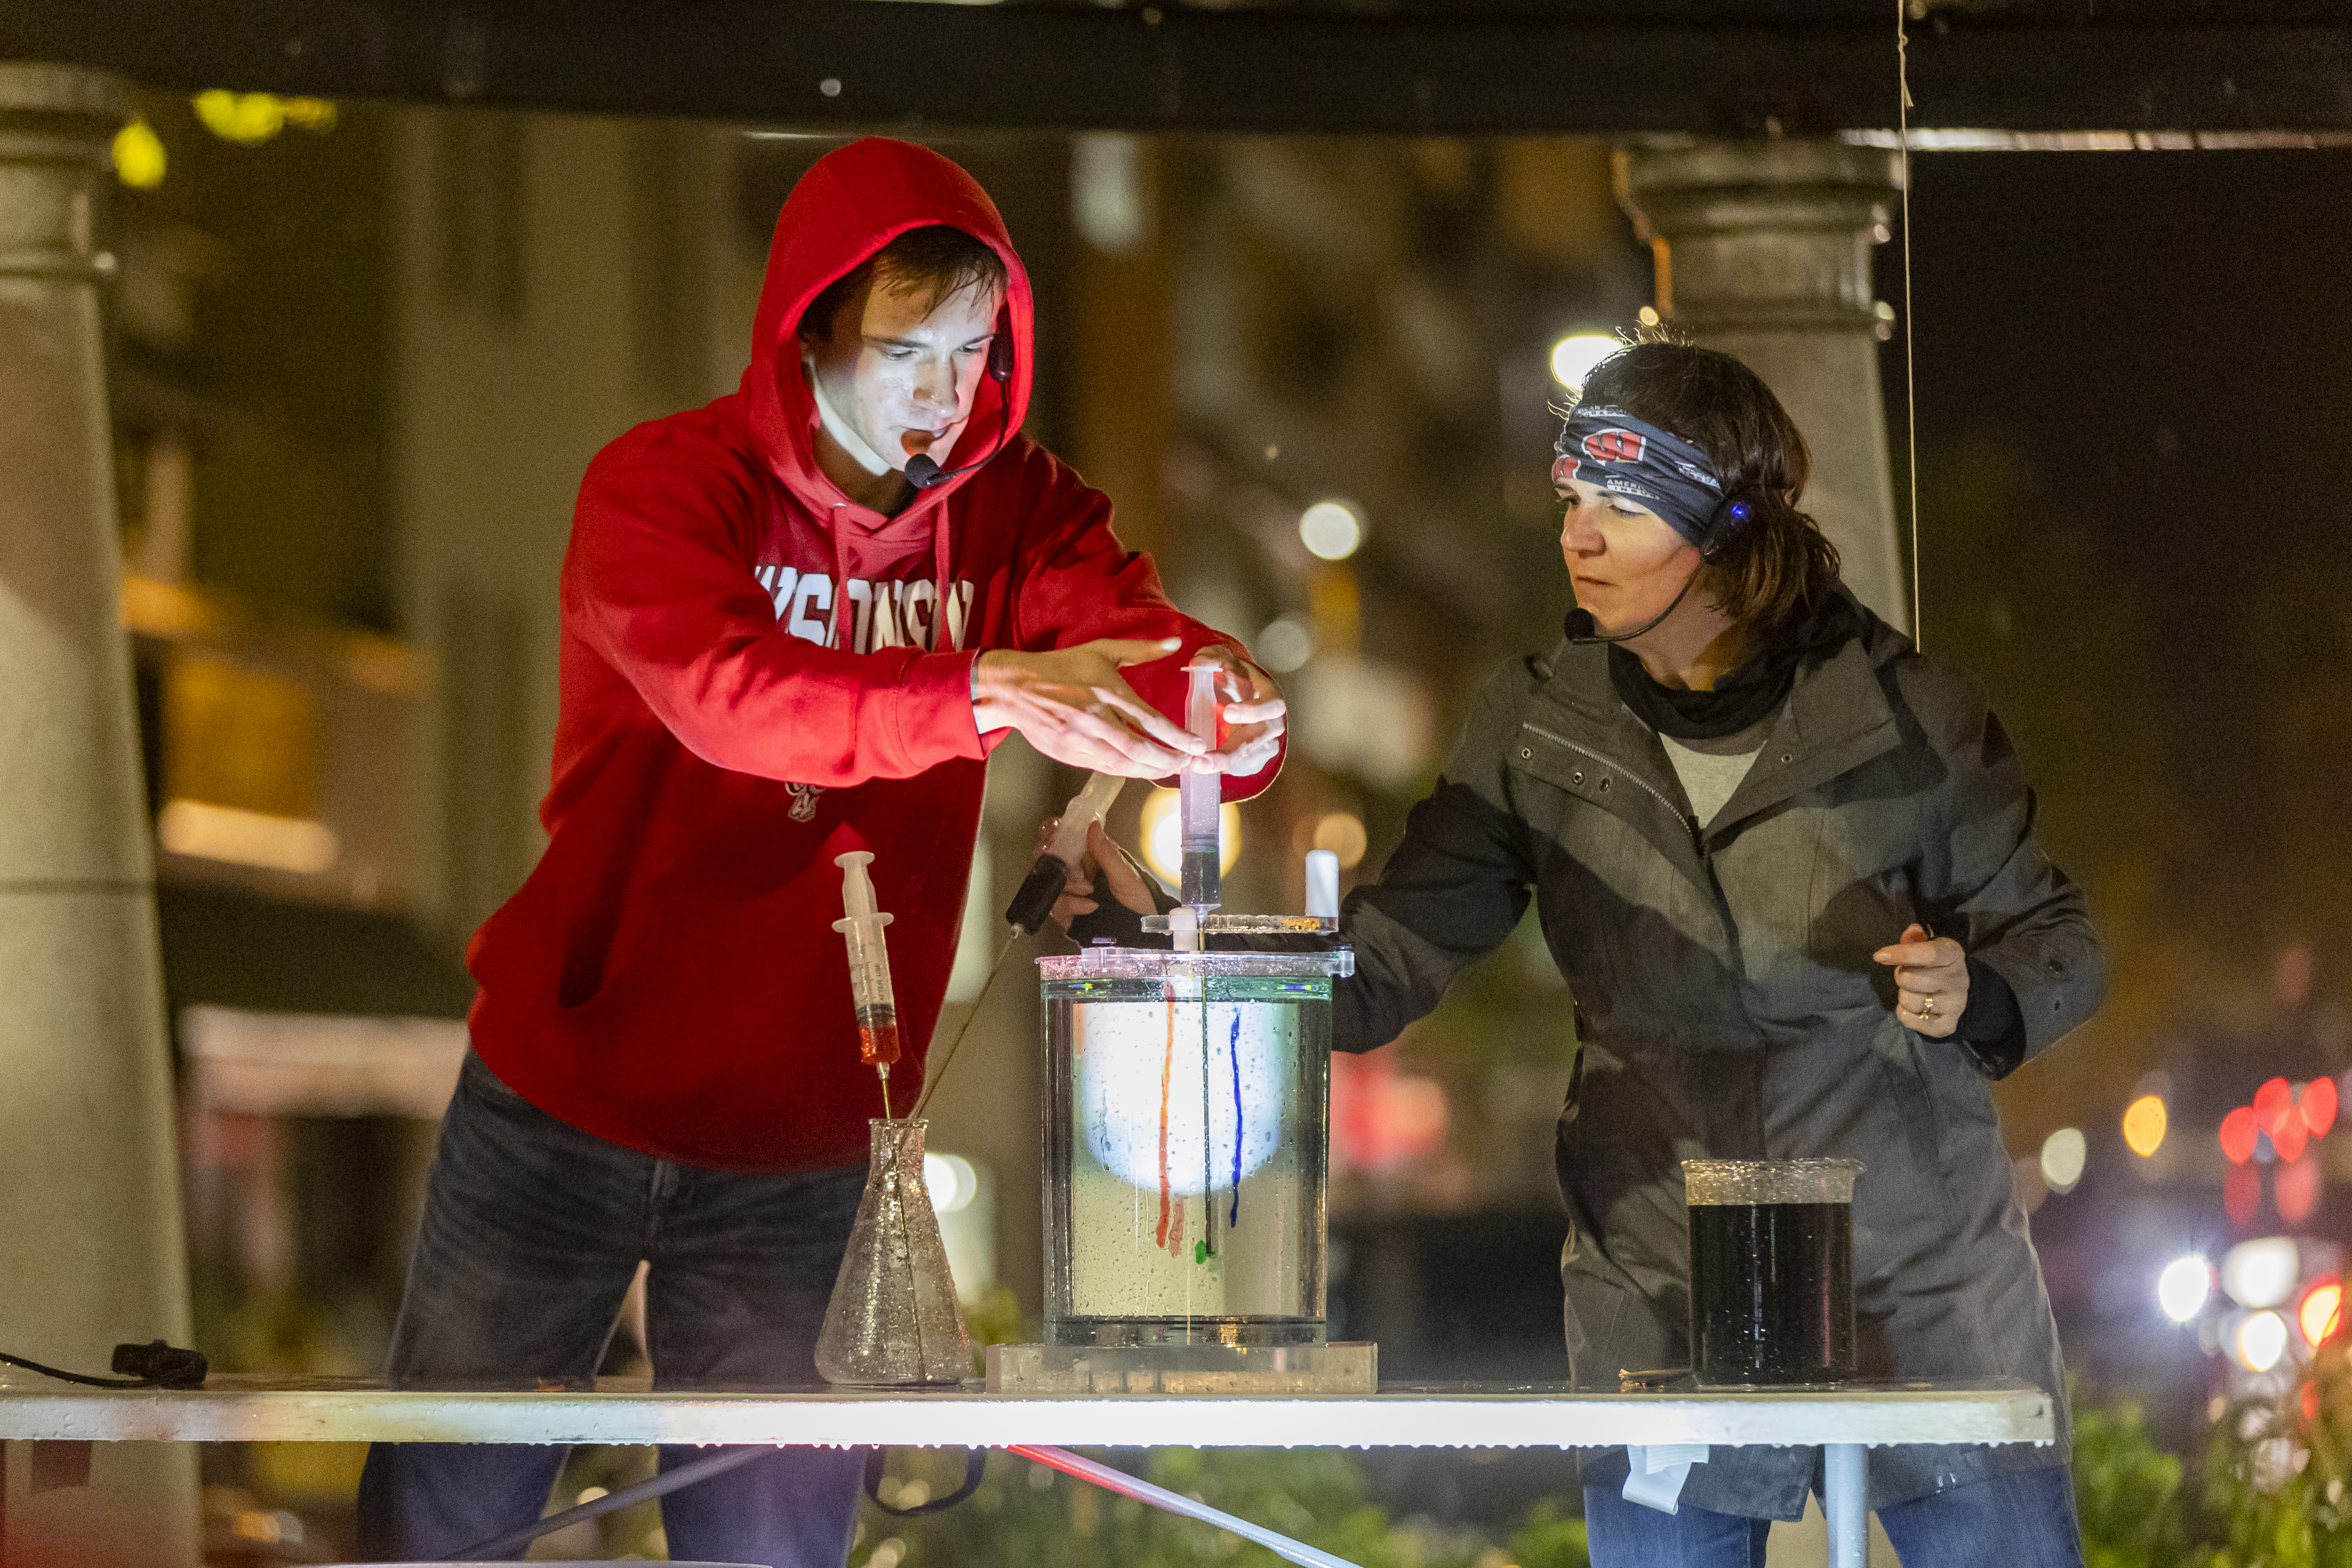 a man in a red Wisconsin sweatshirt uses a syringe to inject colored liquid into a large beaker. A woman, bundled up from the rain and cold, looks on